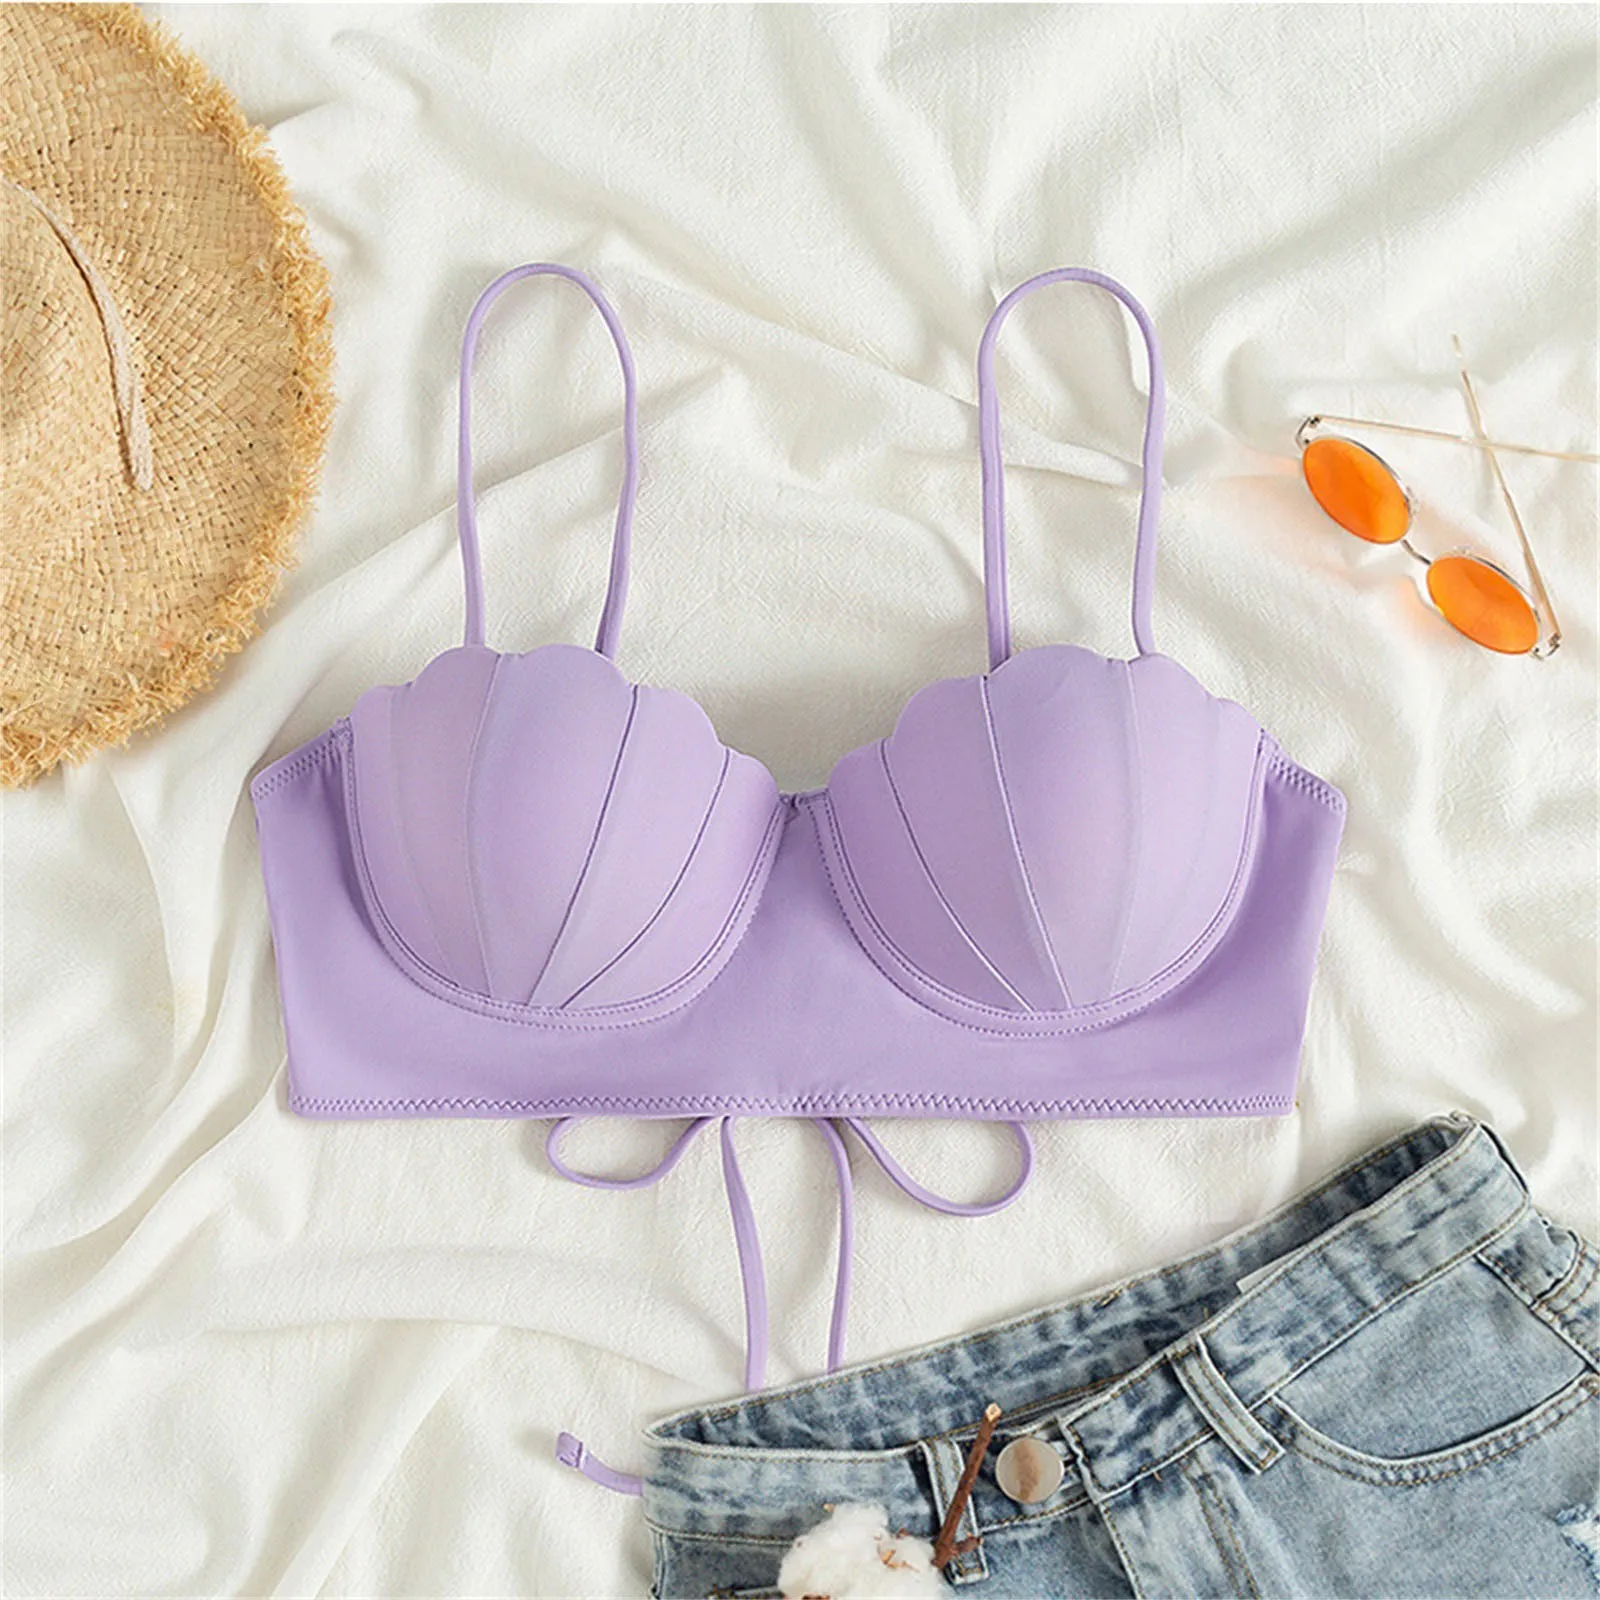 

Strappy Seashell Bikini Top Mermaid Swim Tops Push Up Bathing Suit Tops For Women With Underwire Bras Swimsuits Sexy Lace Up Bra